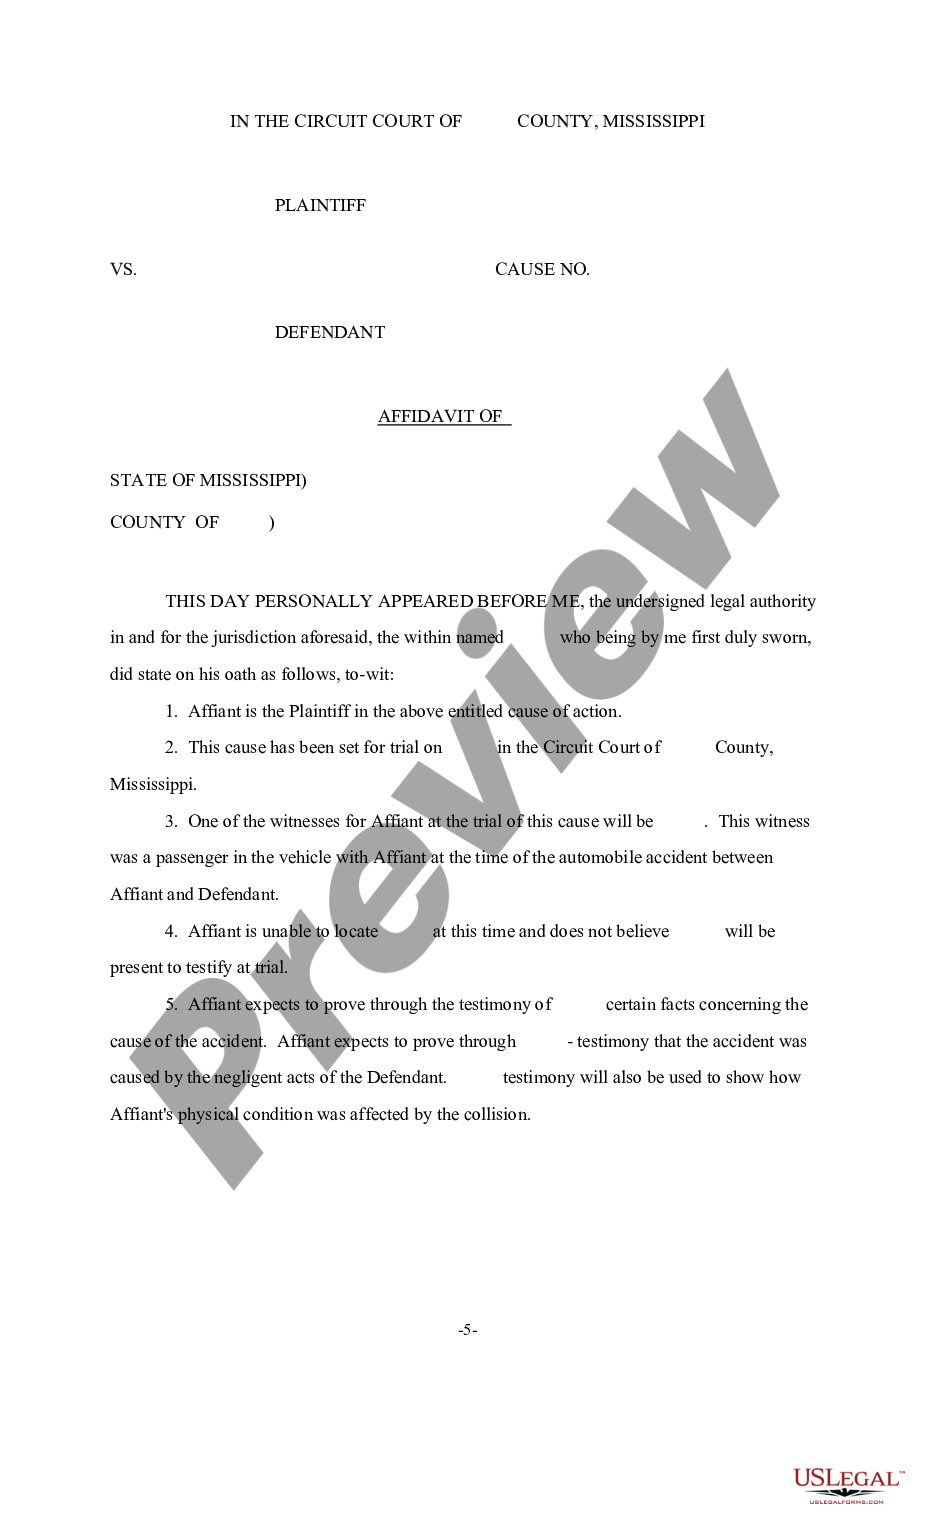 mississippi-motion-for-continuance-motion-of-continuance-us-legal-forms